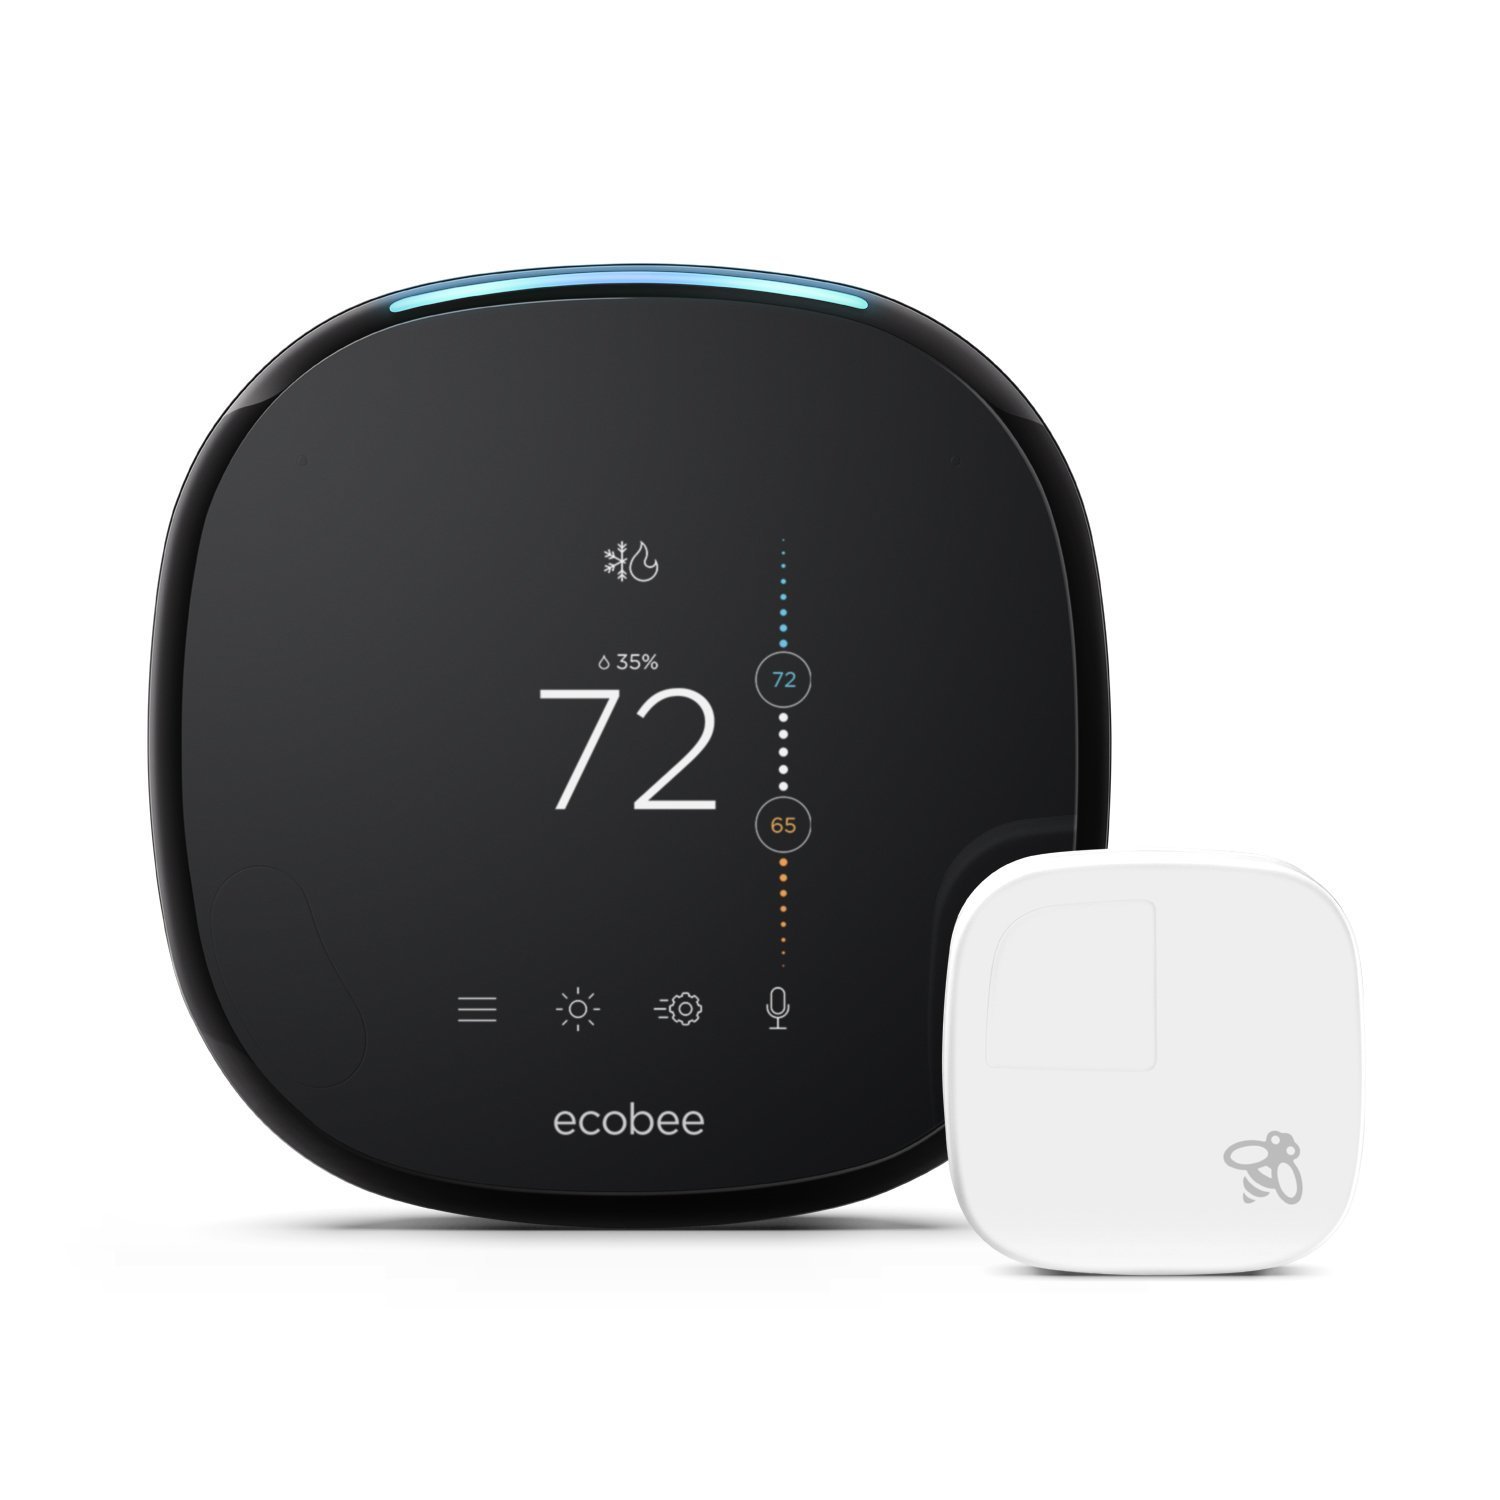 where-to-find-rebates-on-smart-thermostats-imore